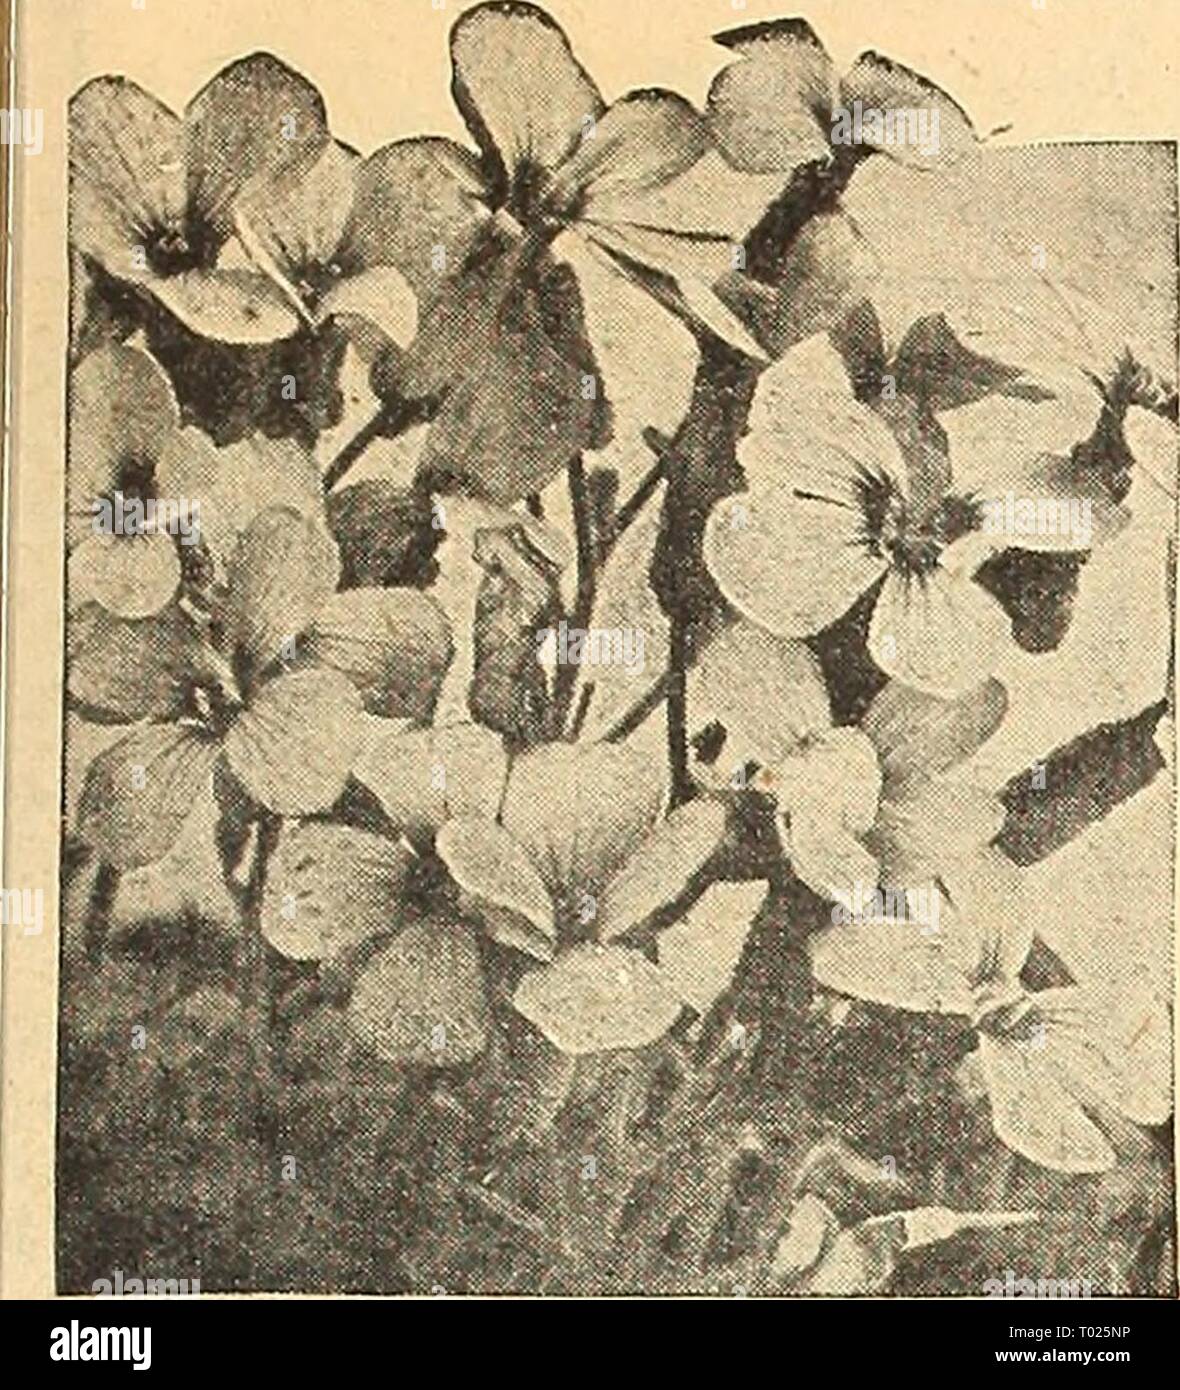 Dreer's garden book for 1946 : faithful for over a century . dreersgardenbook1946henr Year: 1946  Aubrietia, Large-Flowering Hybrids Aubrietia r^p] a Rainbow Rock Cress A showy spring-flowering perennial with silvery green foliage covered by attractive, large, and colorful blooms. 1406 Blood-Red. Very showy and coloi-ful. Pkt. ISc; large pkt. SOc. 1407 Bouganvillei. Impressive large blue flowers. Pkt. ISc; large pkt. SOc. 1408 Leichtlini. A very appealing carmine-rose shade. Pkt. ISc; large pkt. SOc. 1409 Lilac. A color which always is greatly admired. Pkt. ISc; large pkt. SOc. 1410 Large-Flow Stock Photo